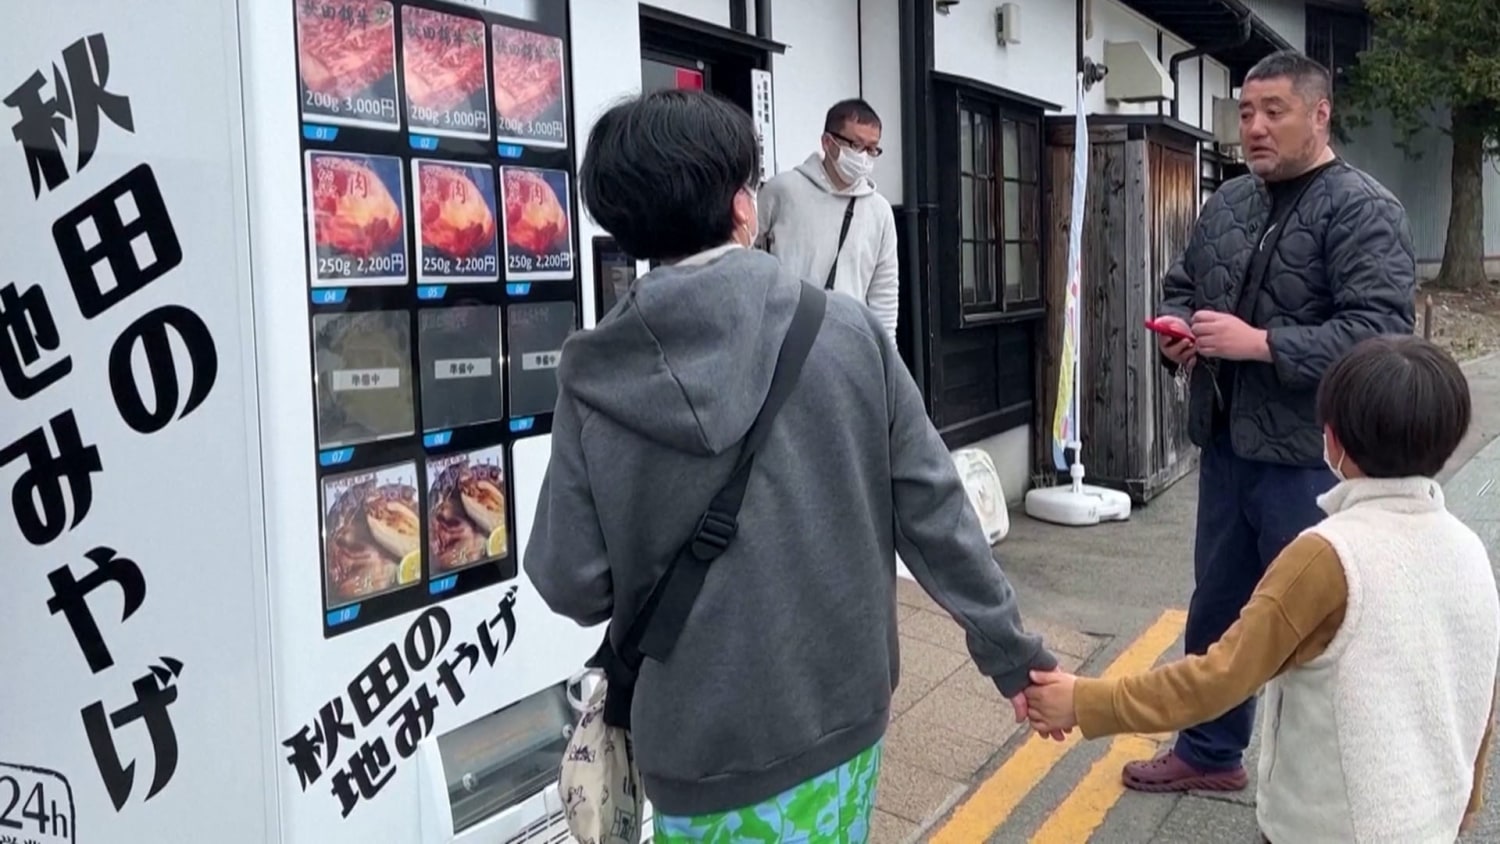 This remote village in Japan sells bear meat from a vending